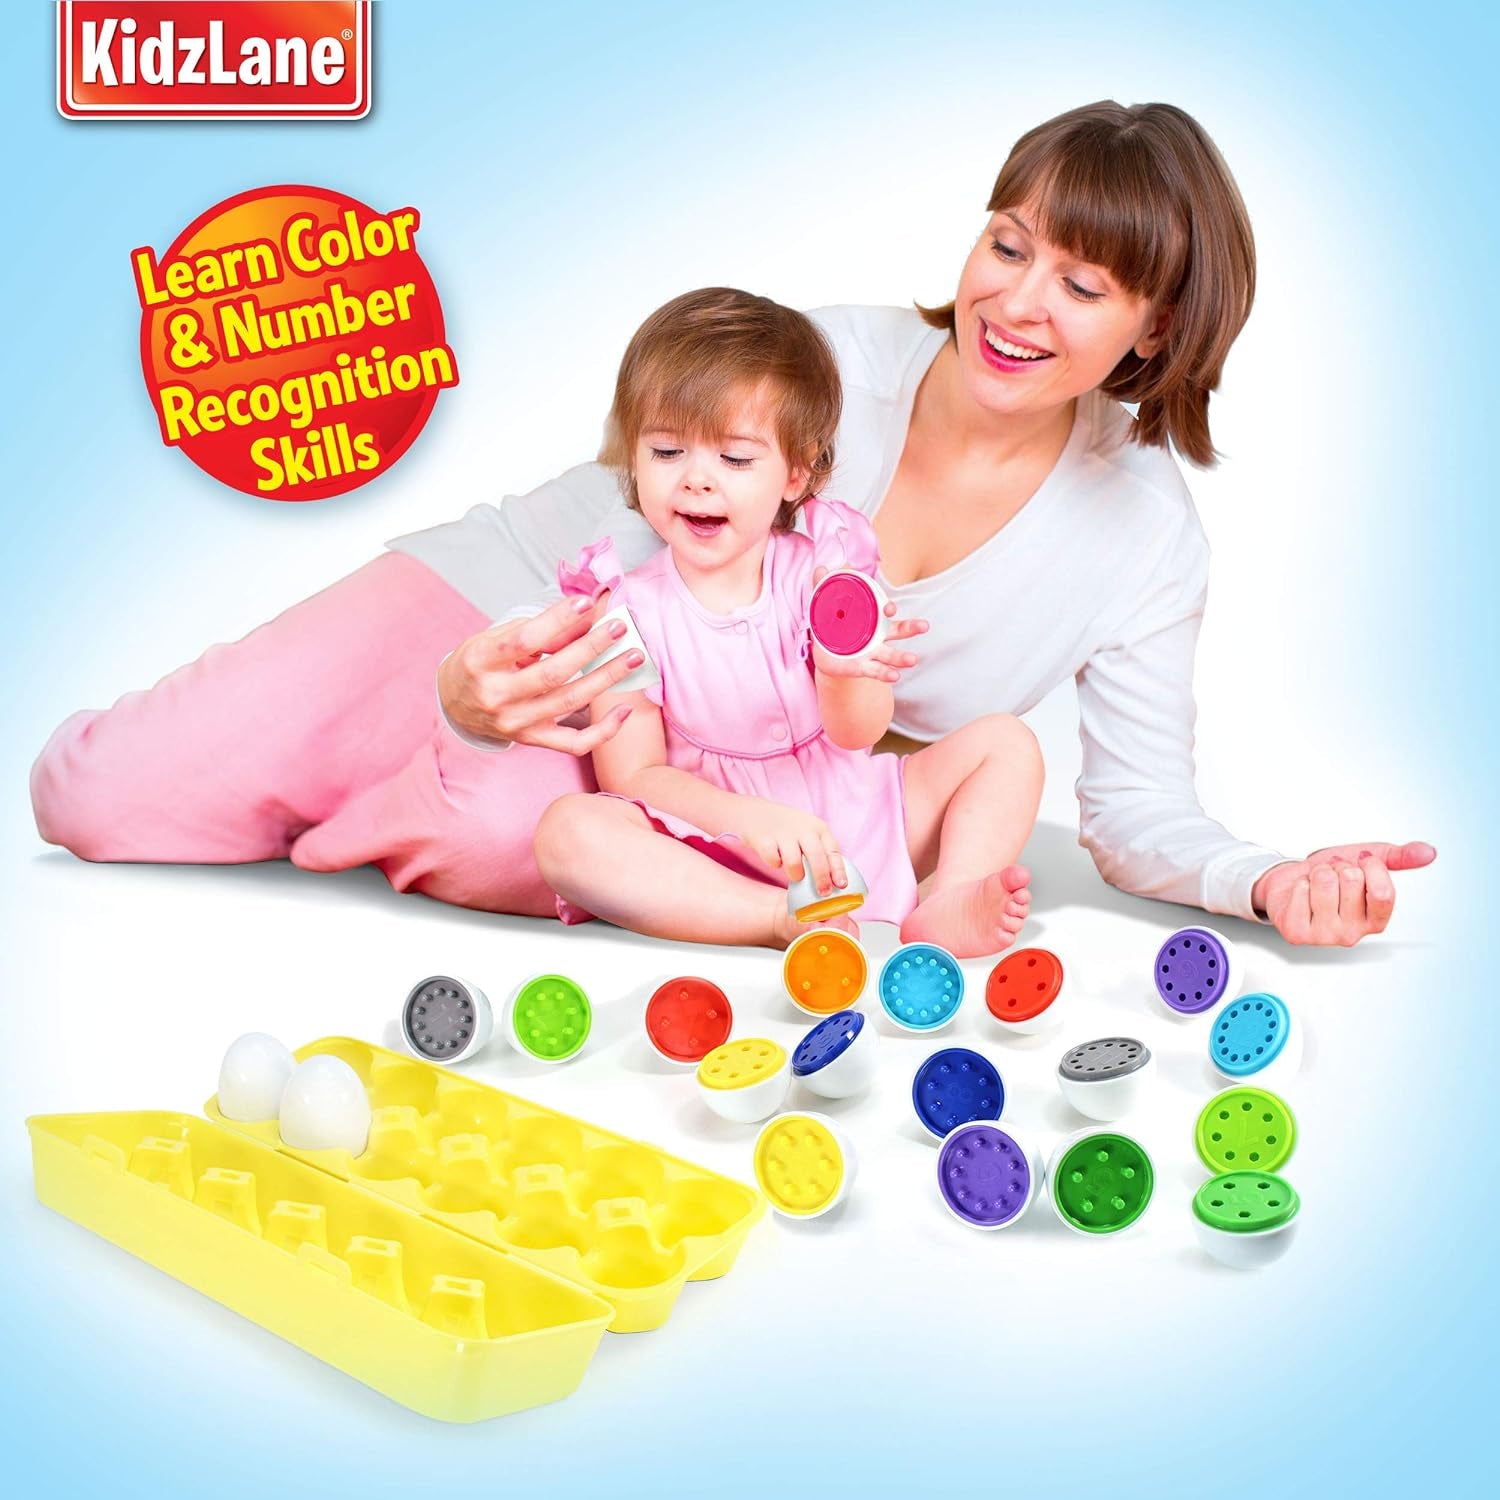 Color Matching Egg Toy Set - 12 Play Eggs Toddler Toys - Educational Color and Number Recognition Skills - Kids Toy Eggs That Crack Open - Learning Egg Game Puzzle for Toddlers, Boys, Girls